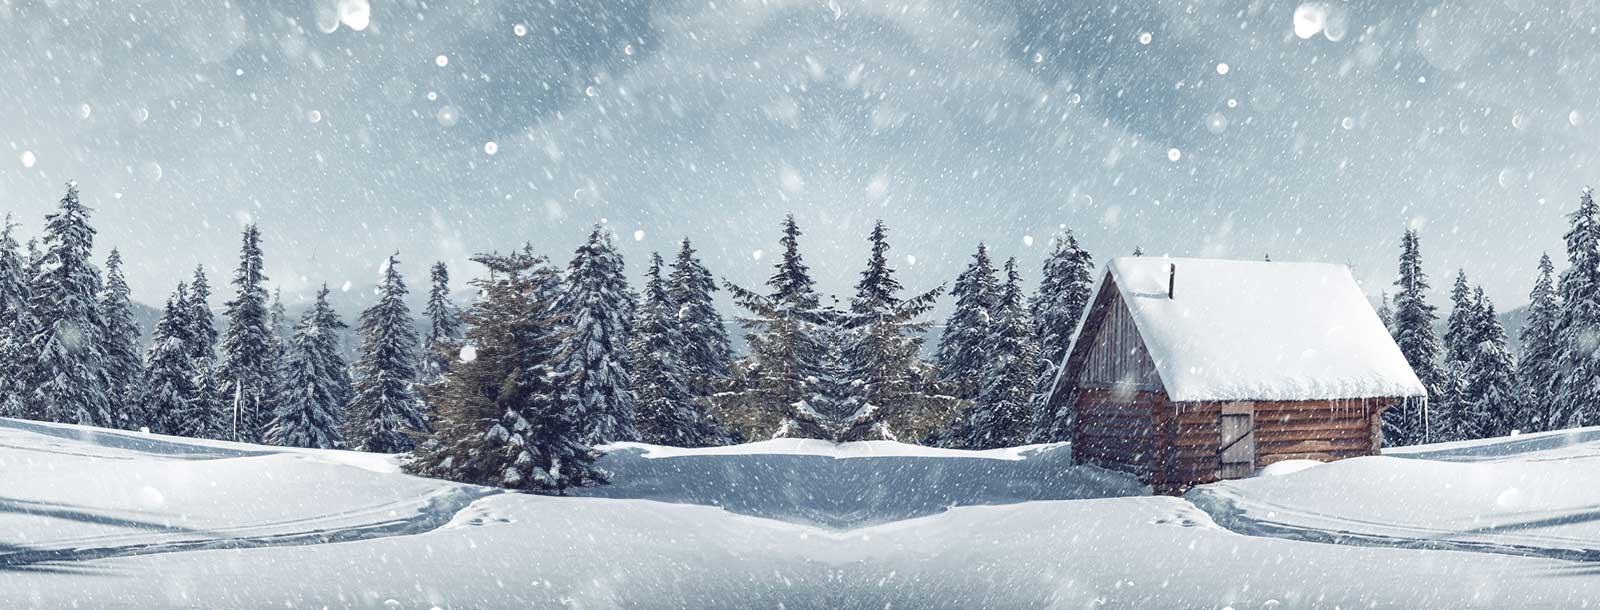 Winter scene with snow-covered evergreen trees and a snow-covered log cabin.